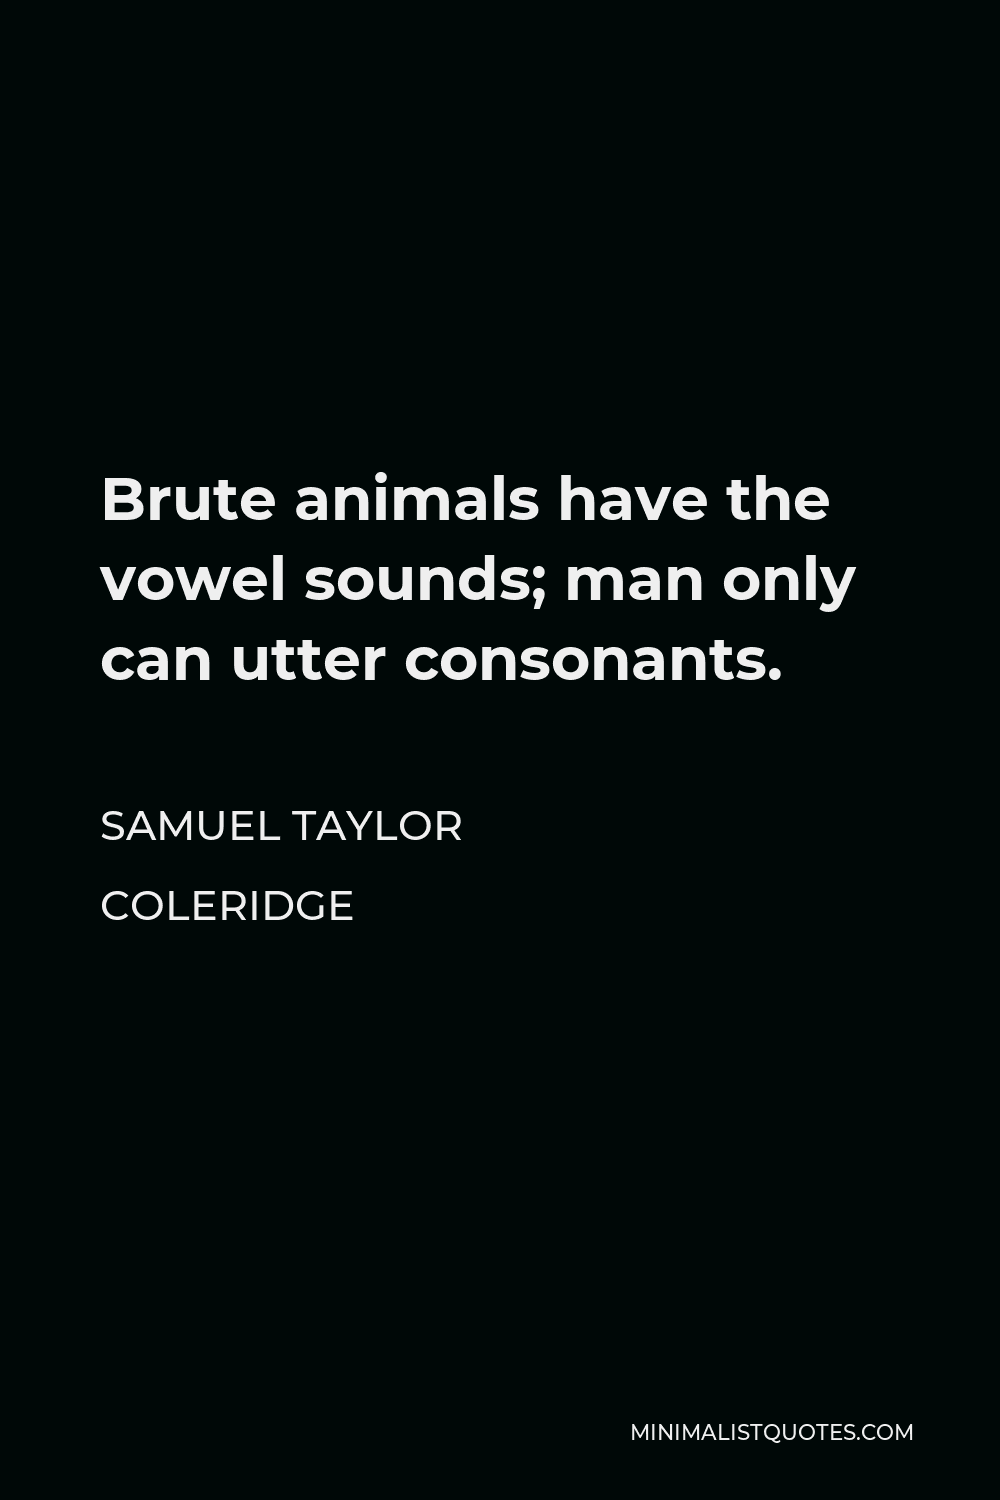 Samuel Taylor Coleridge Quote - Brute animals have the vowel sounds; man only can utter consonants.